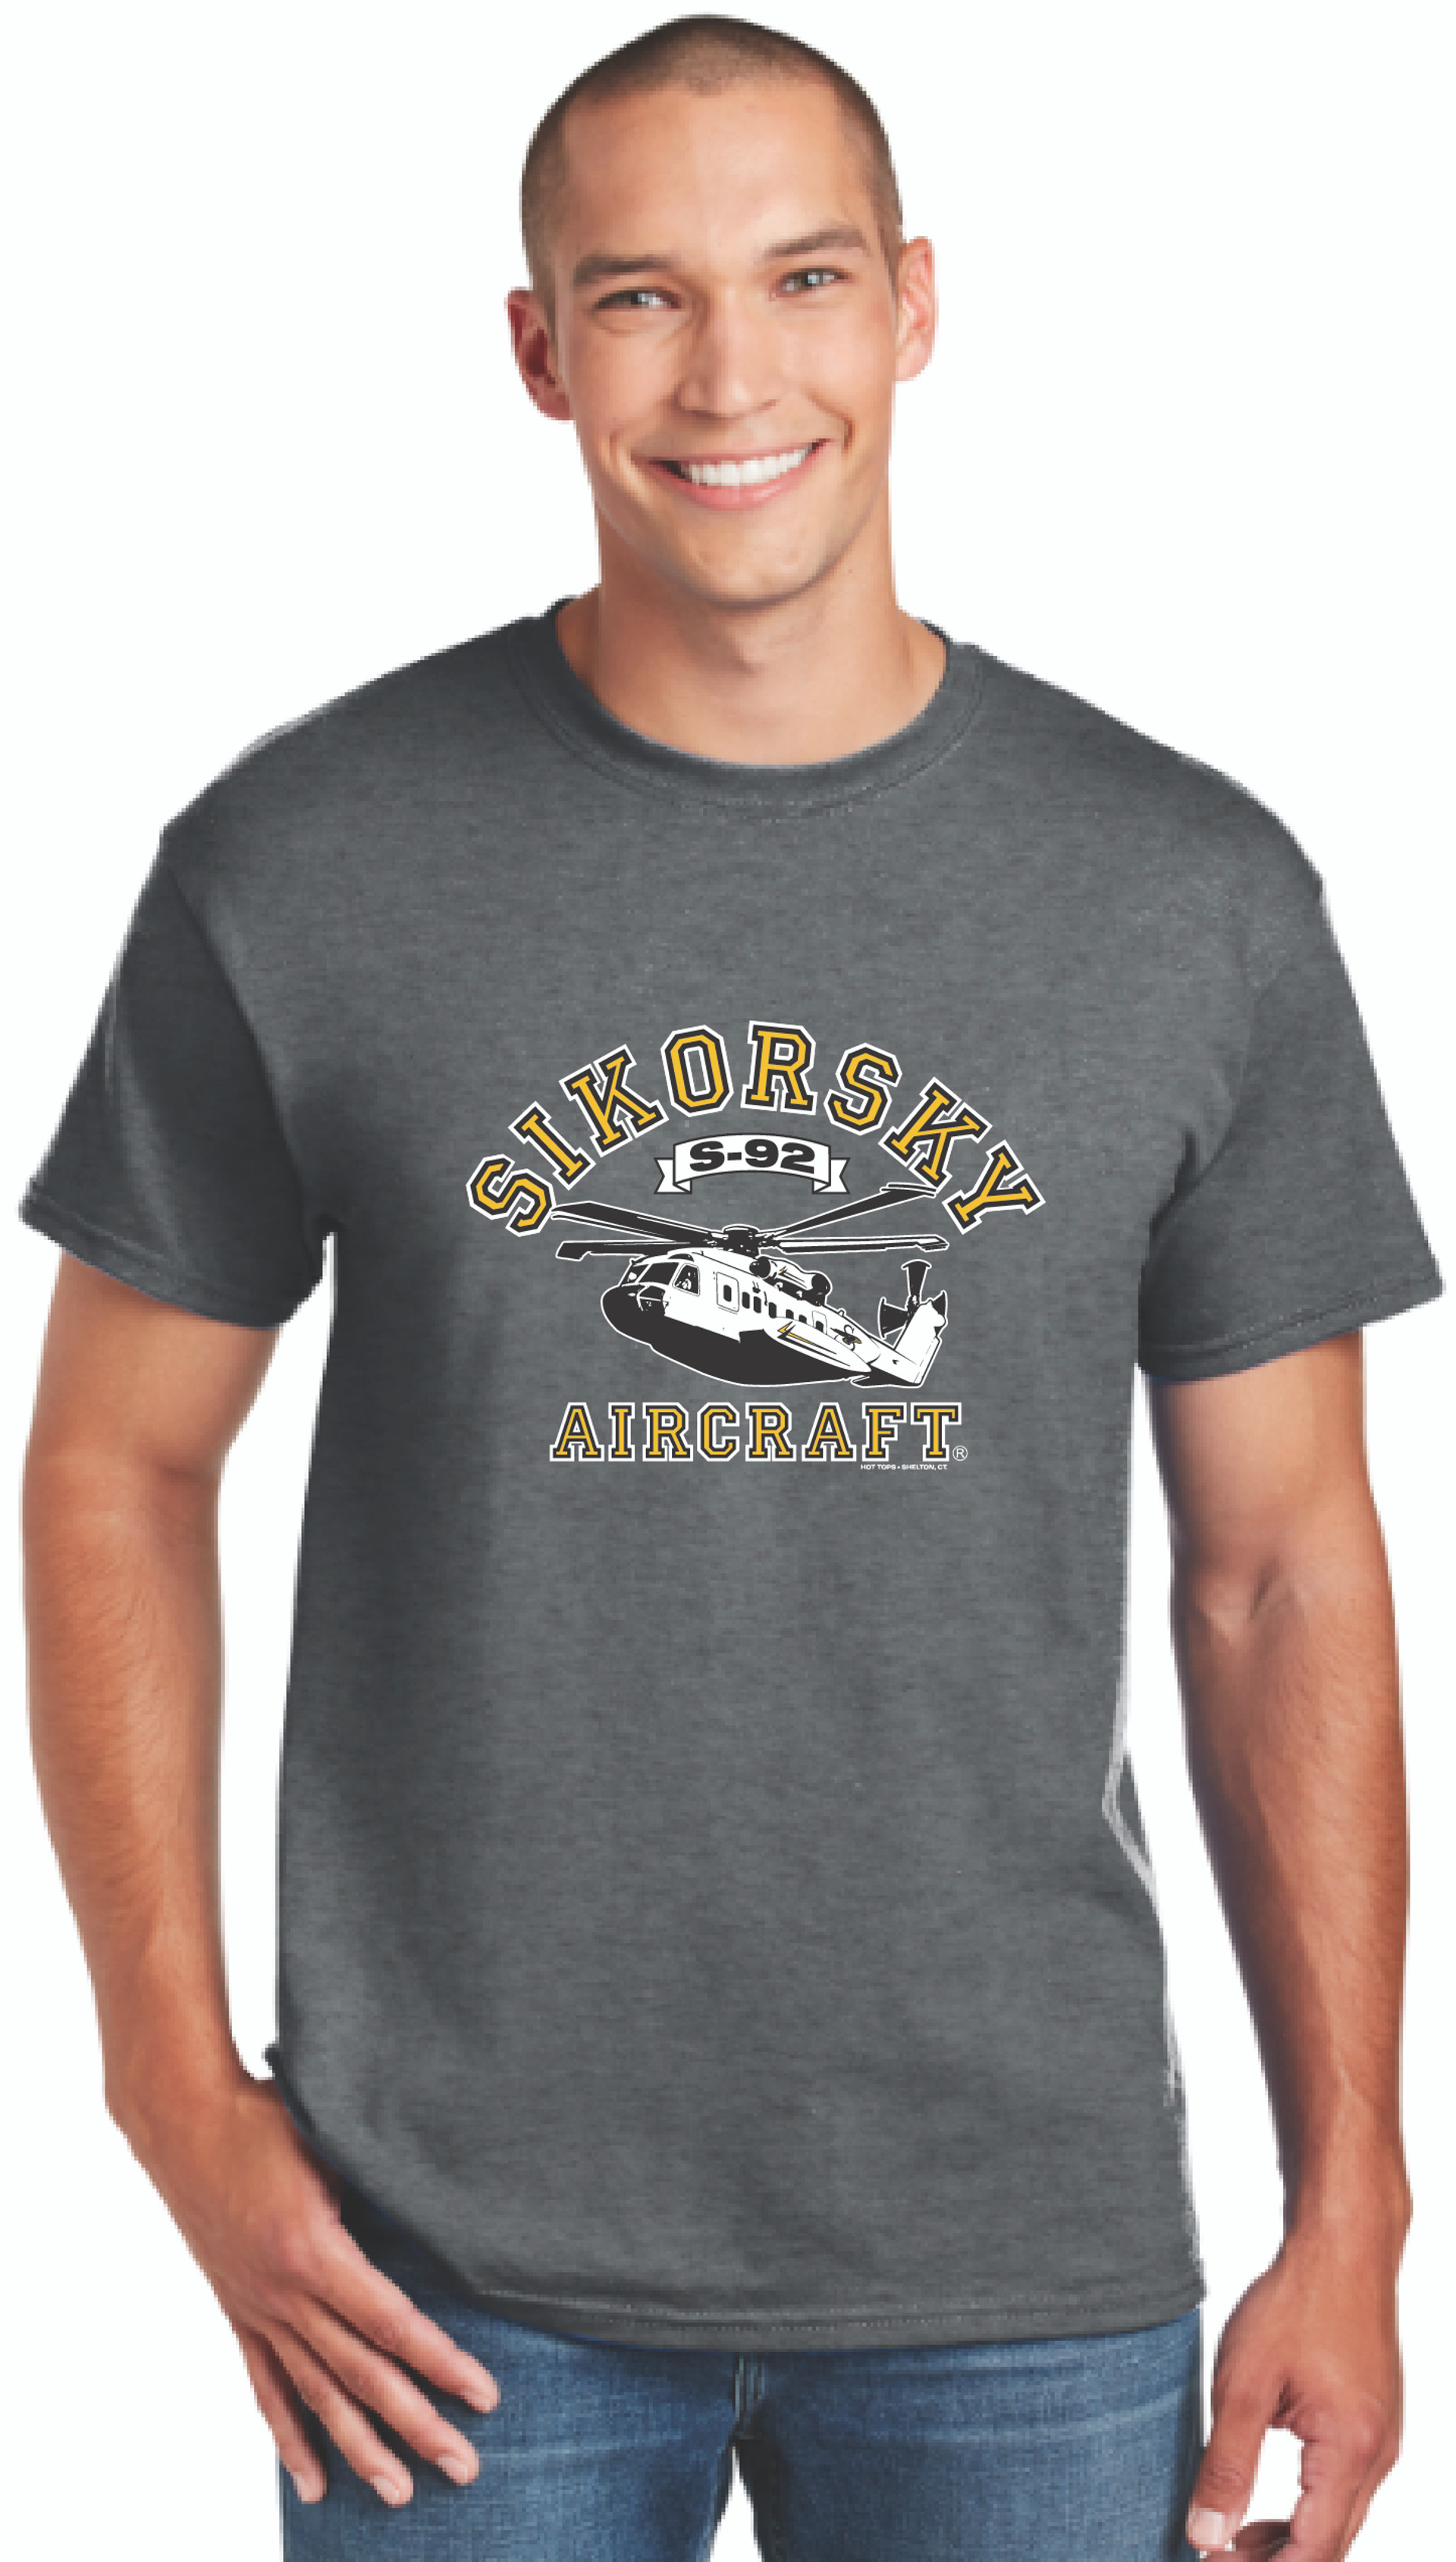 Apparel - T-Shirts - Sikorsky Store